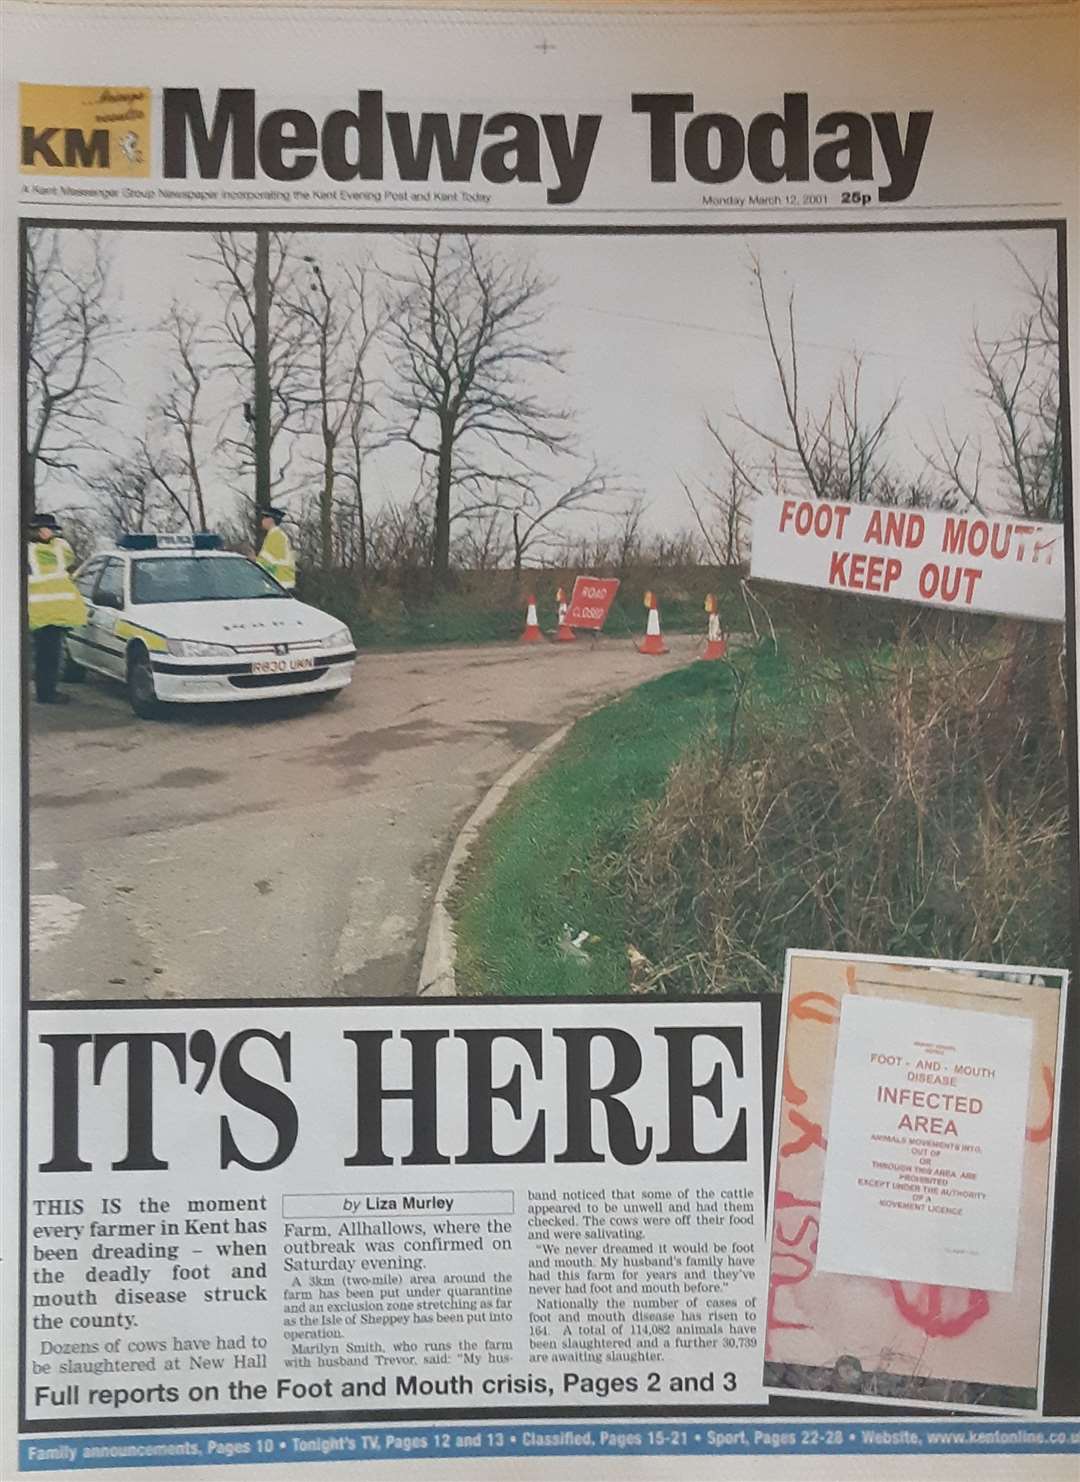 The KMG reports on the first Kent case of foot and mouth, 2001.